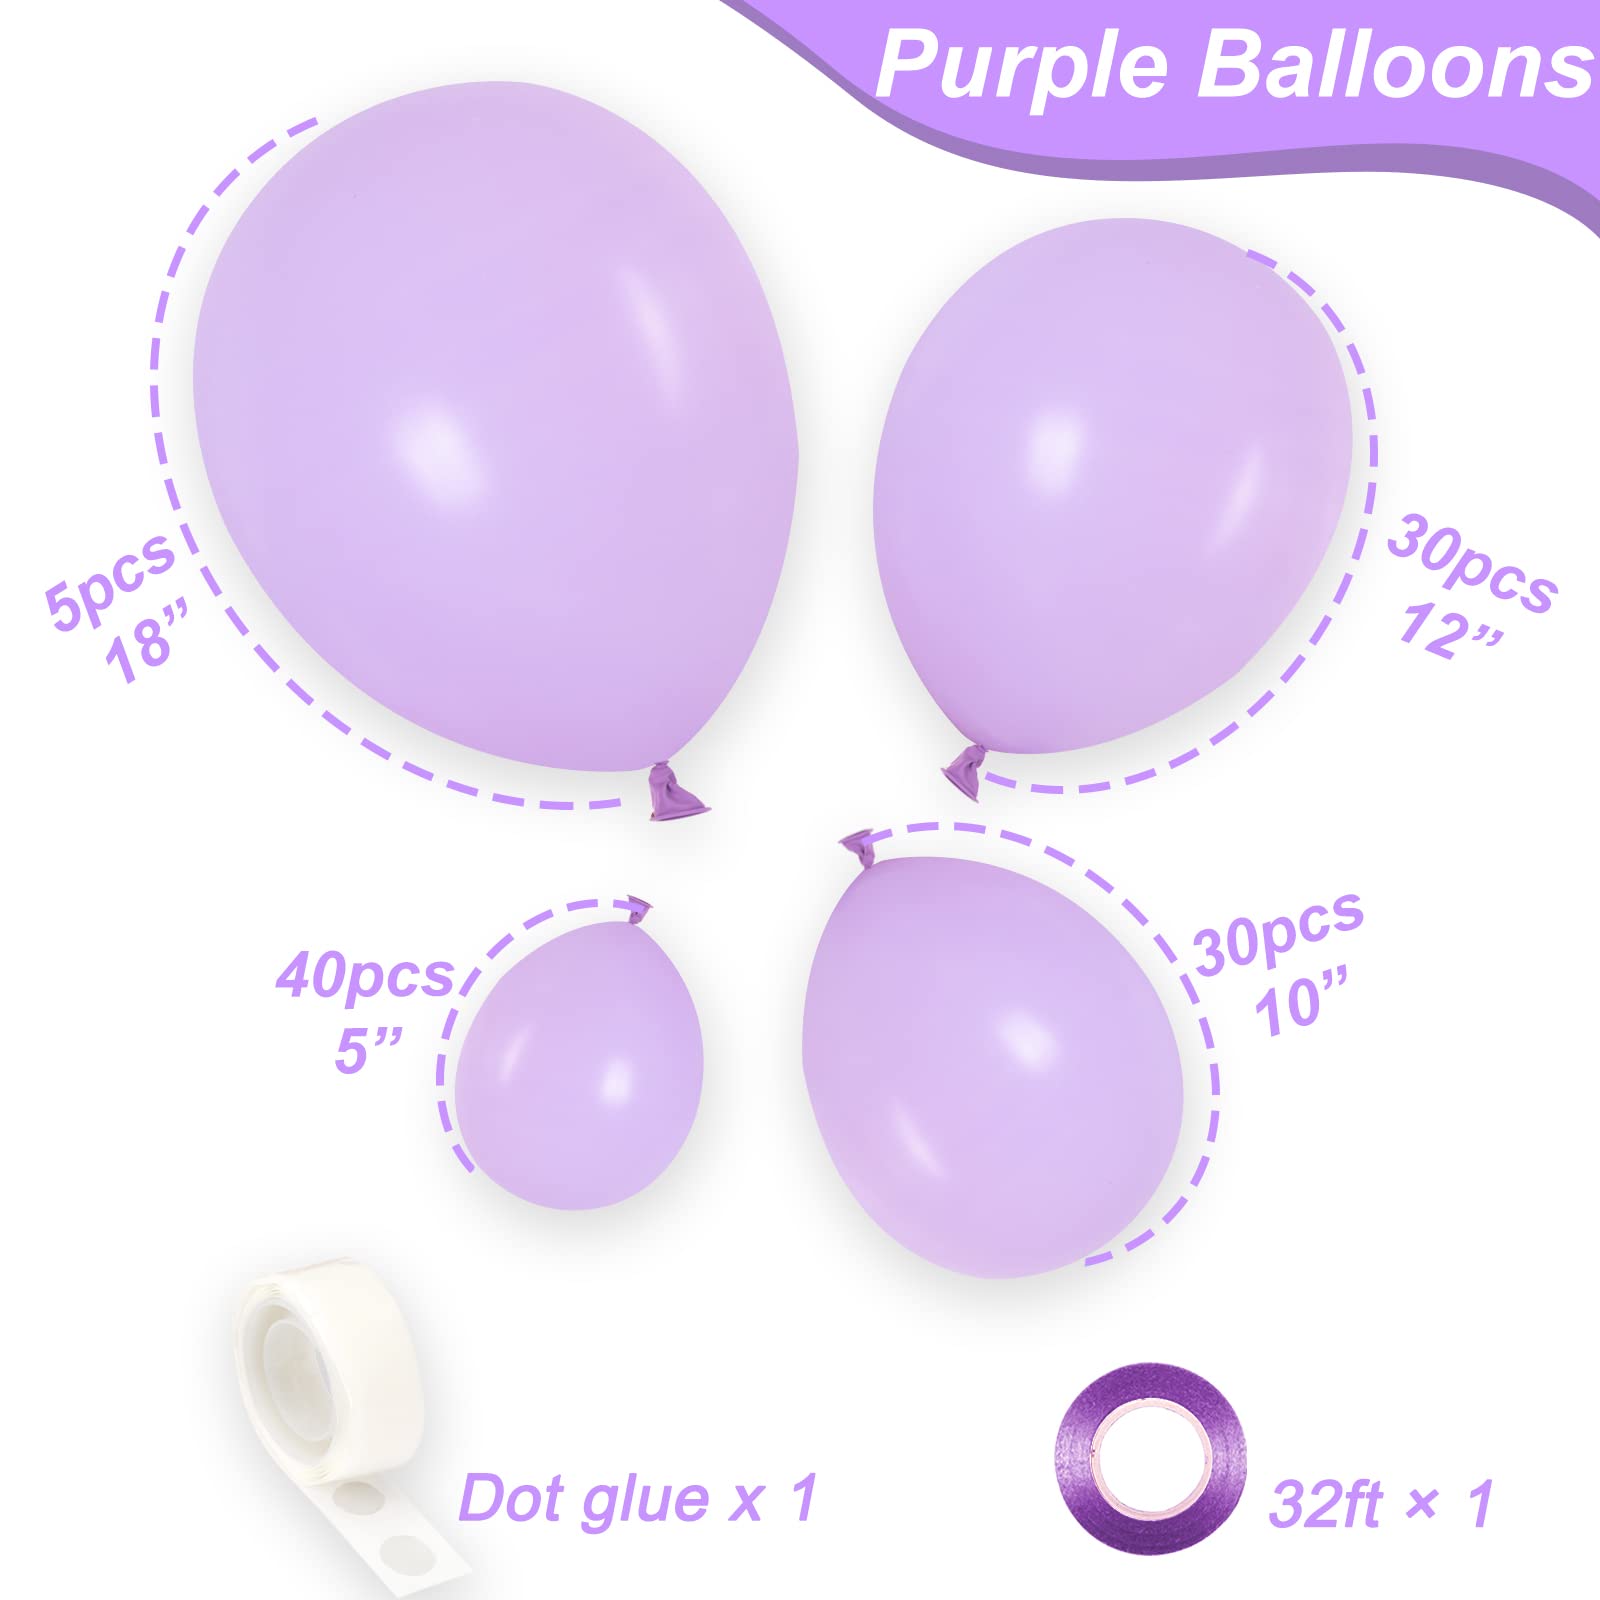 RUBFAC Pastel Purple and Pastel Orange Balloons Different Sizes 105pcs 5/10/12/18 Inches for Garland Arch, Latex Balloons for Birthday Baby Shower Wedding Lilac Lavender Balloons Party Decorations